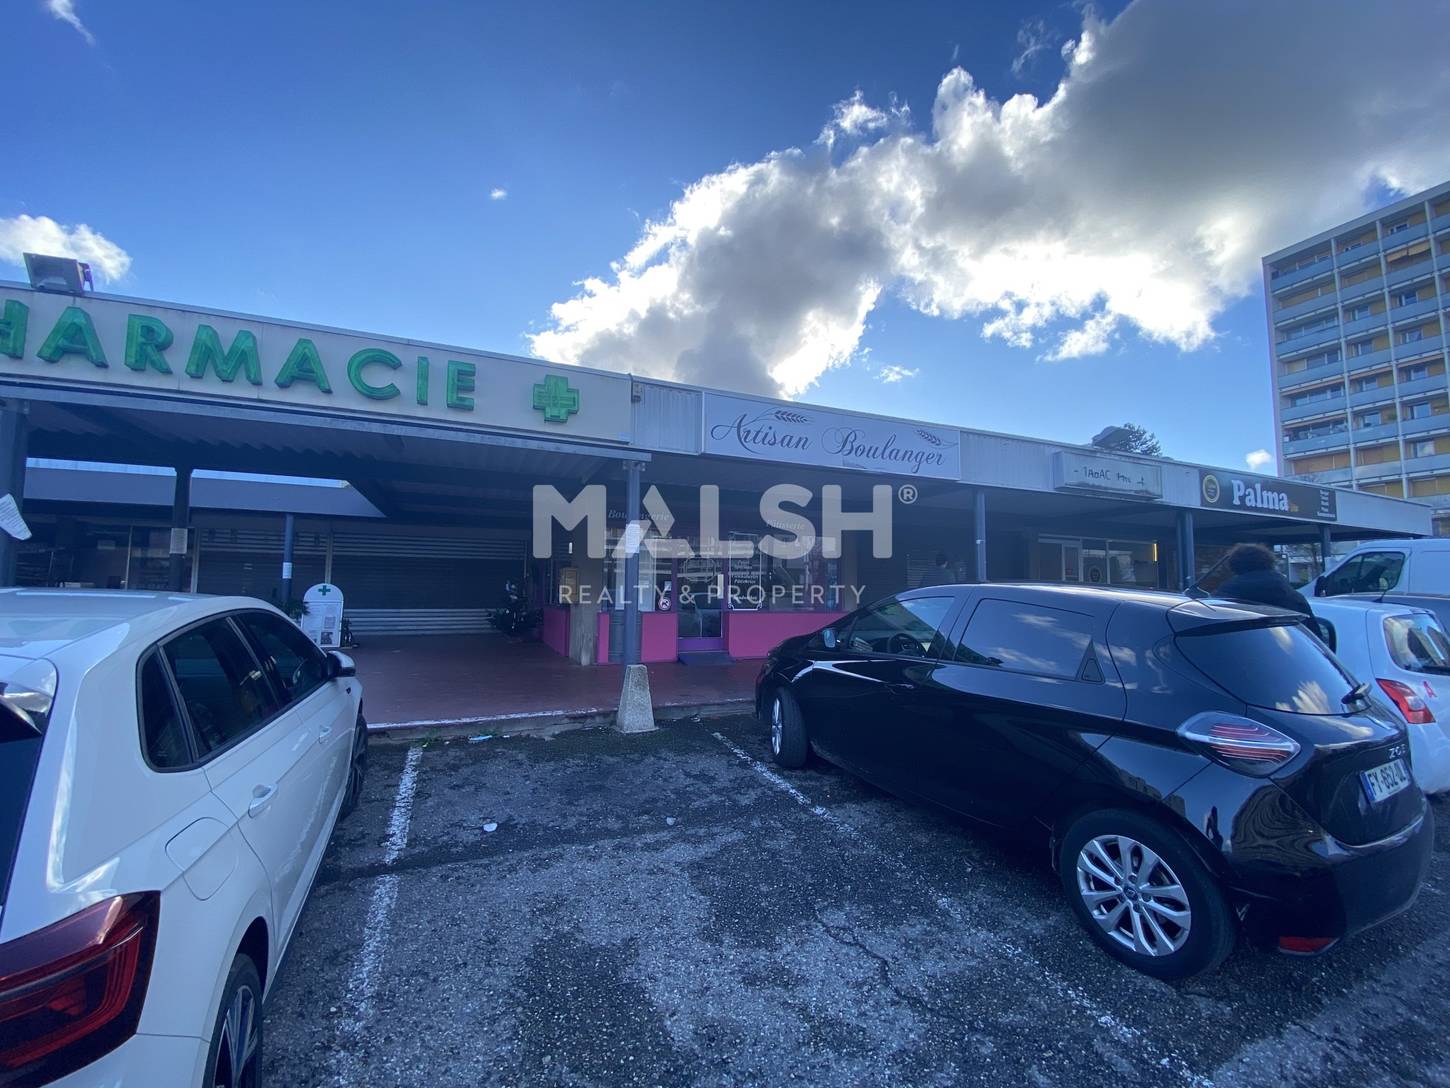 MALSH Realty & Property - Commerce - Lyon Sud Ouest - Oullins - MD_